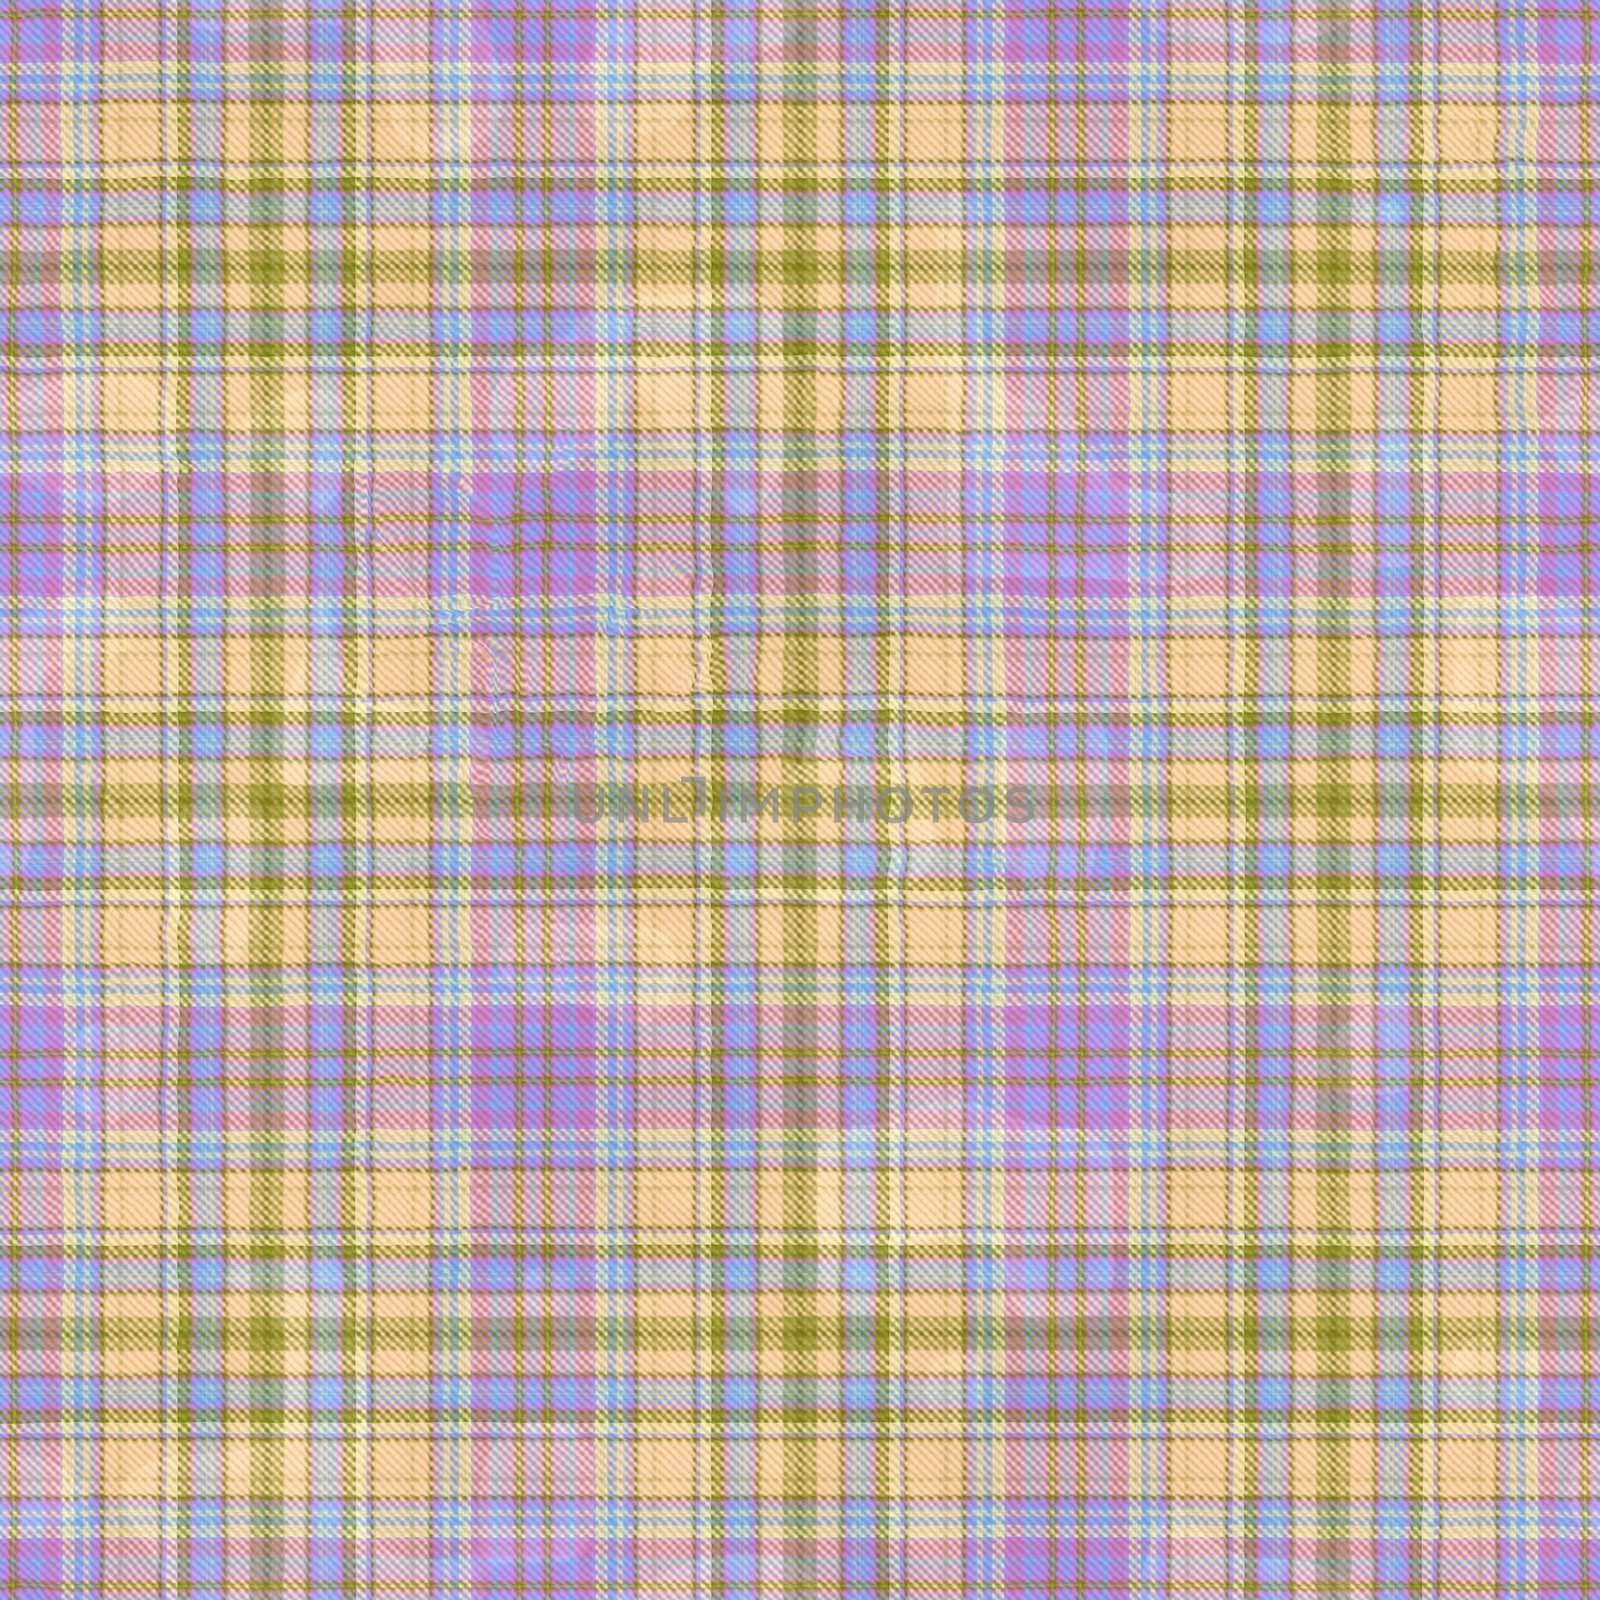 The texture fabrics, the chequered,  suits for duplication of the background, illustration